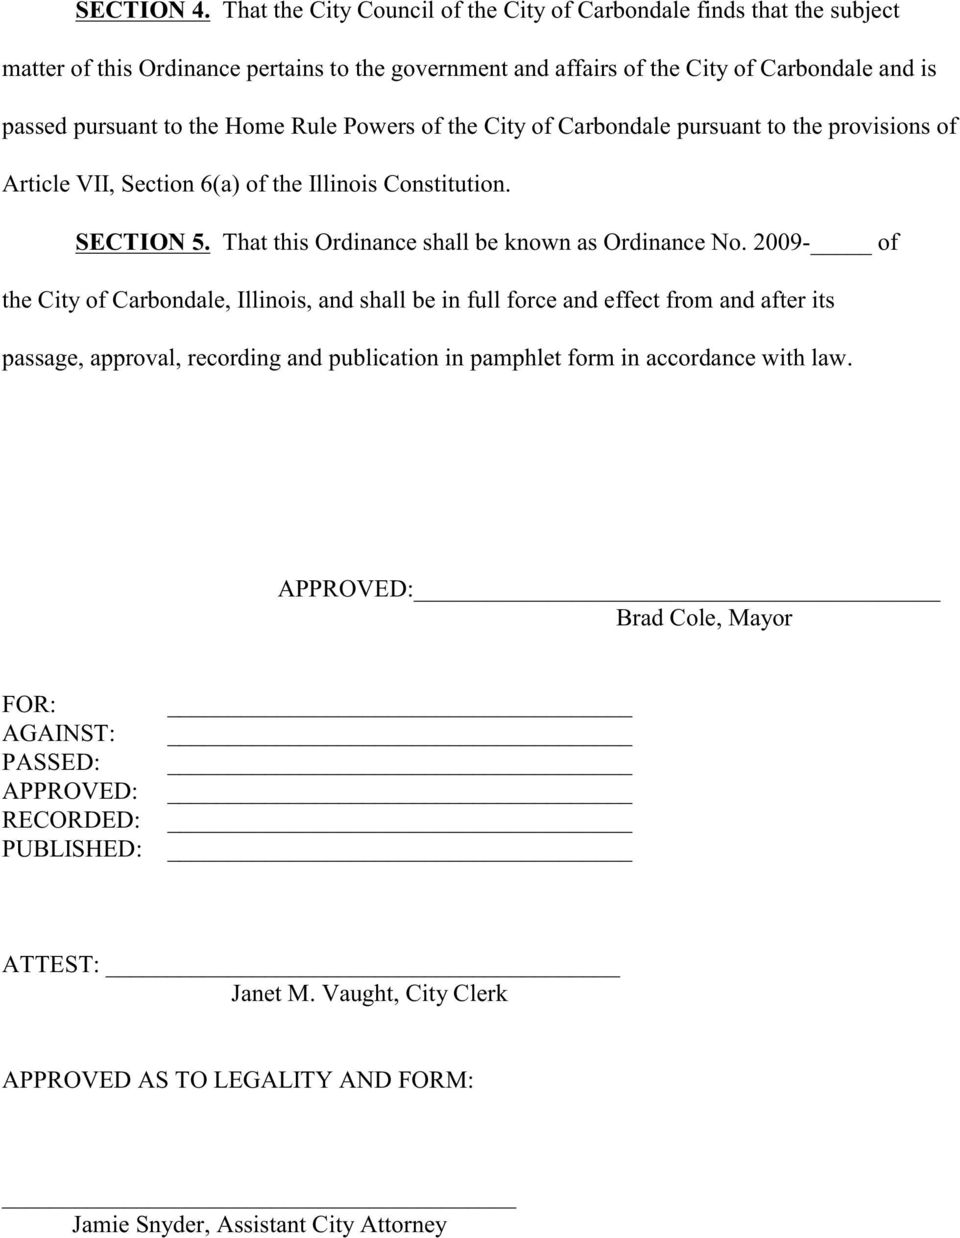 Home Rule Powers of the City of Carbondale pursuant to the provisions of Article VII, Section 6(a) of the Illinois Constitution. SECTION 5. That this Ordinance shall be known as Ordinance No.